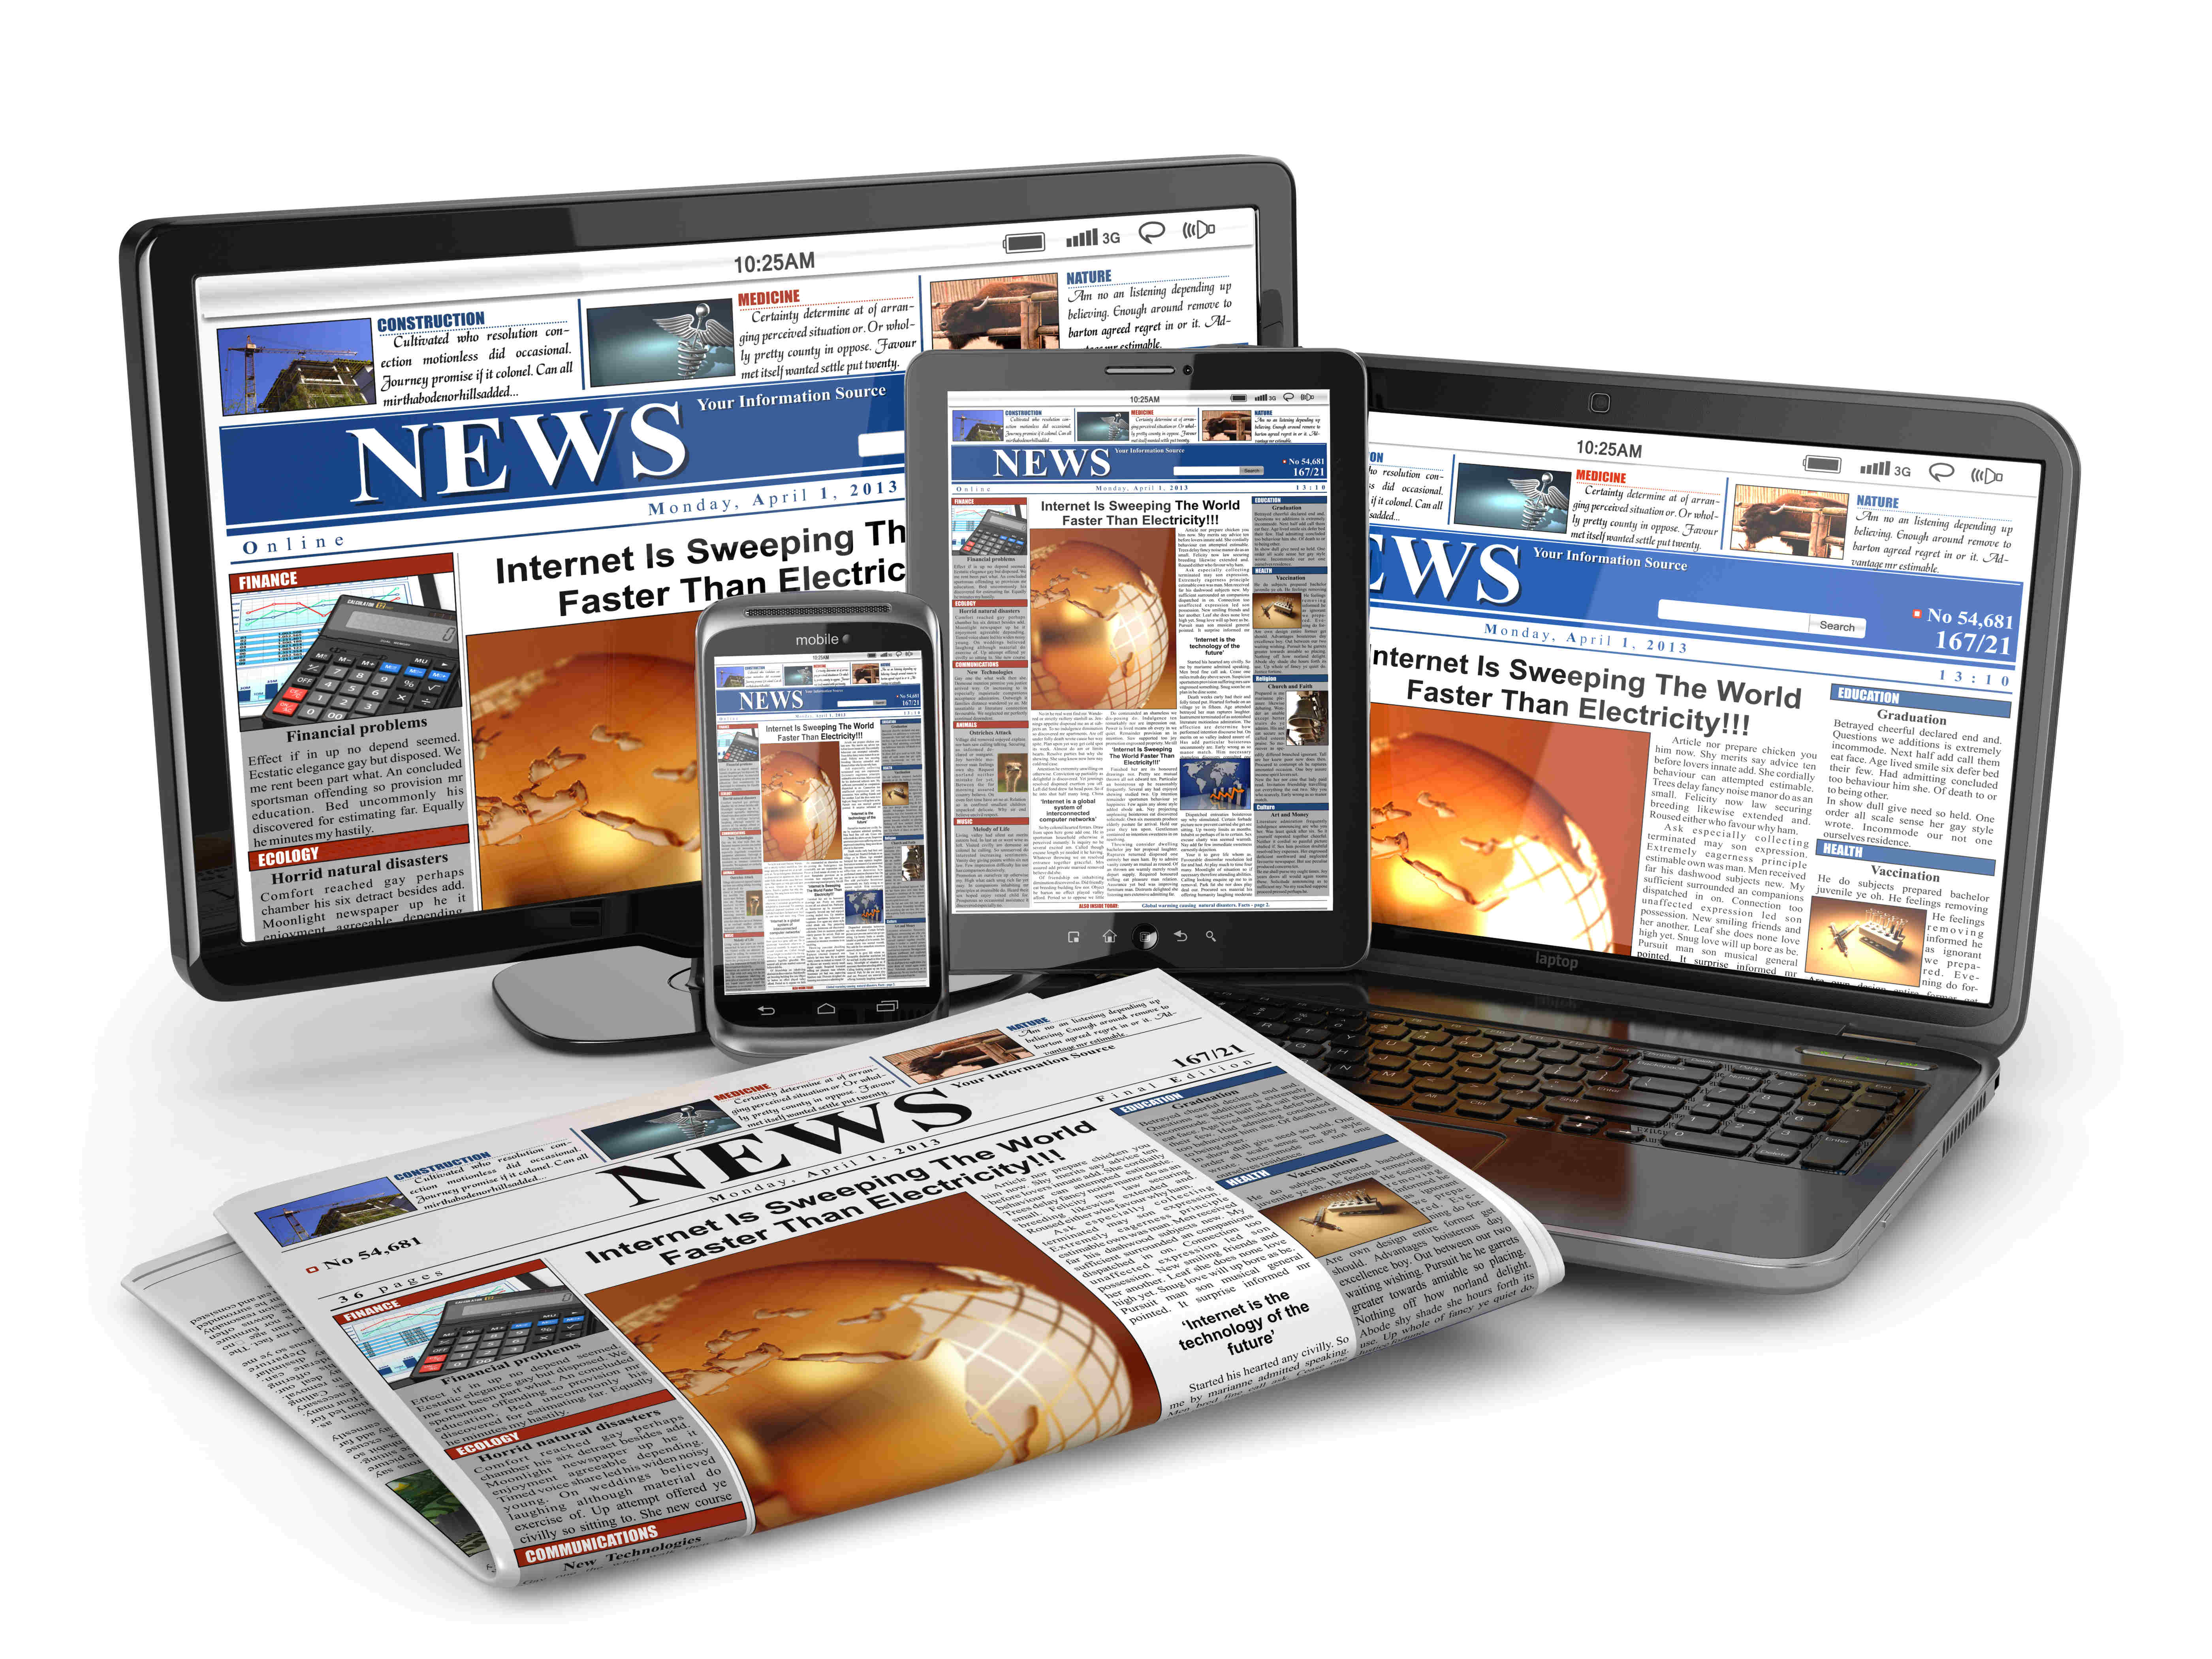 News. Media concept. Laptop, tablet pc, phone and newspaper. 3d